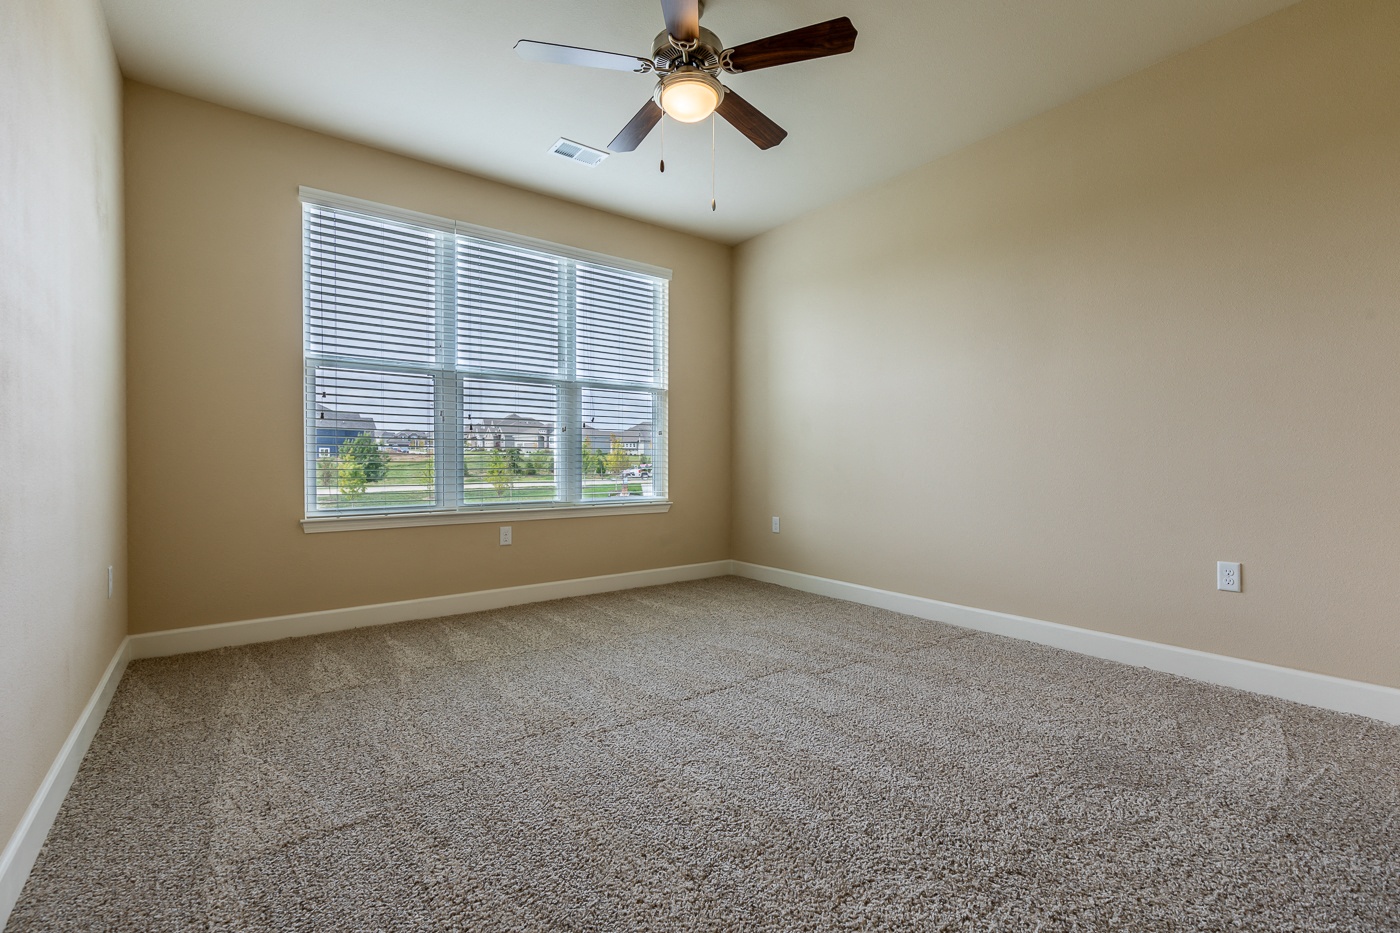 Carpeted Bedroom at The Residences at Bluhawk Apartments, Overland Park, Kansas